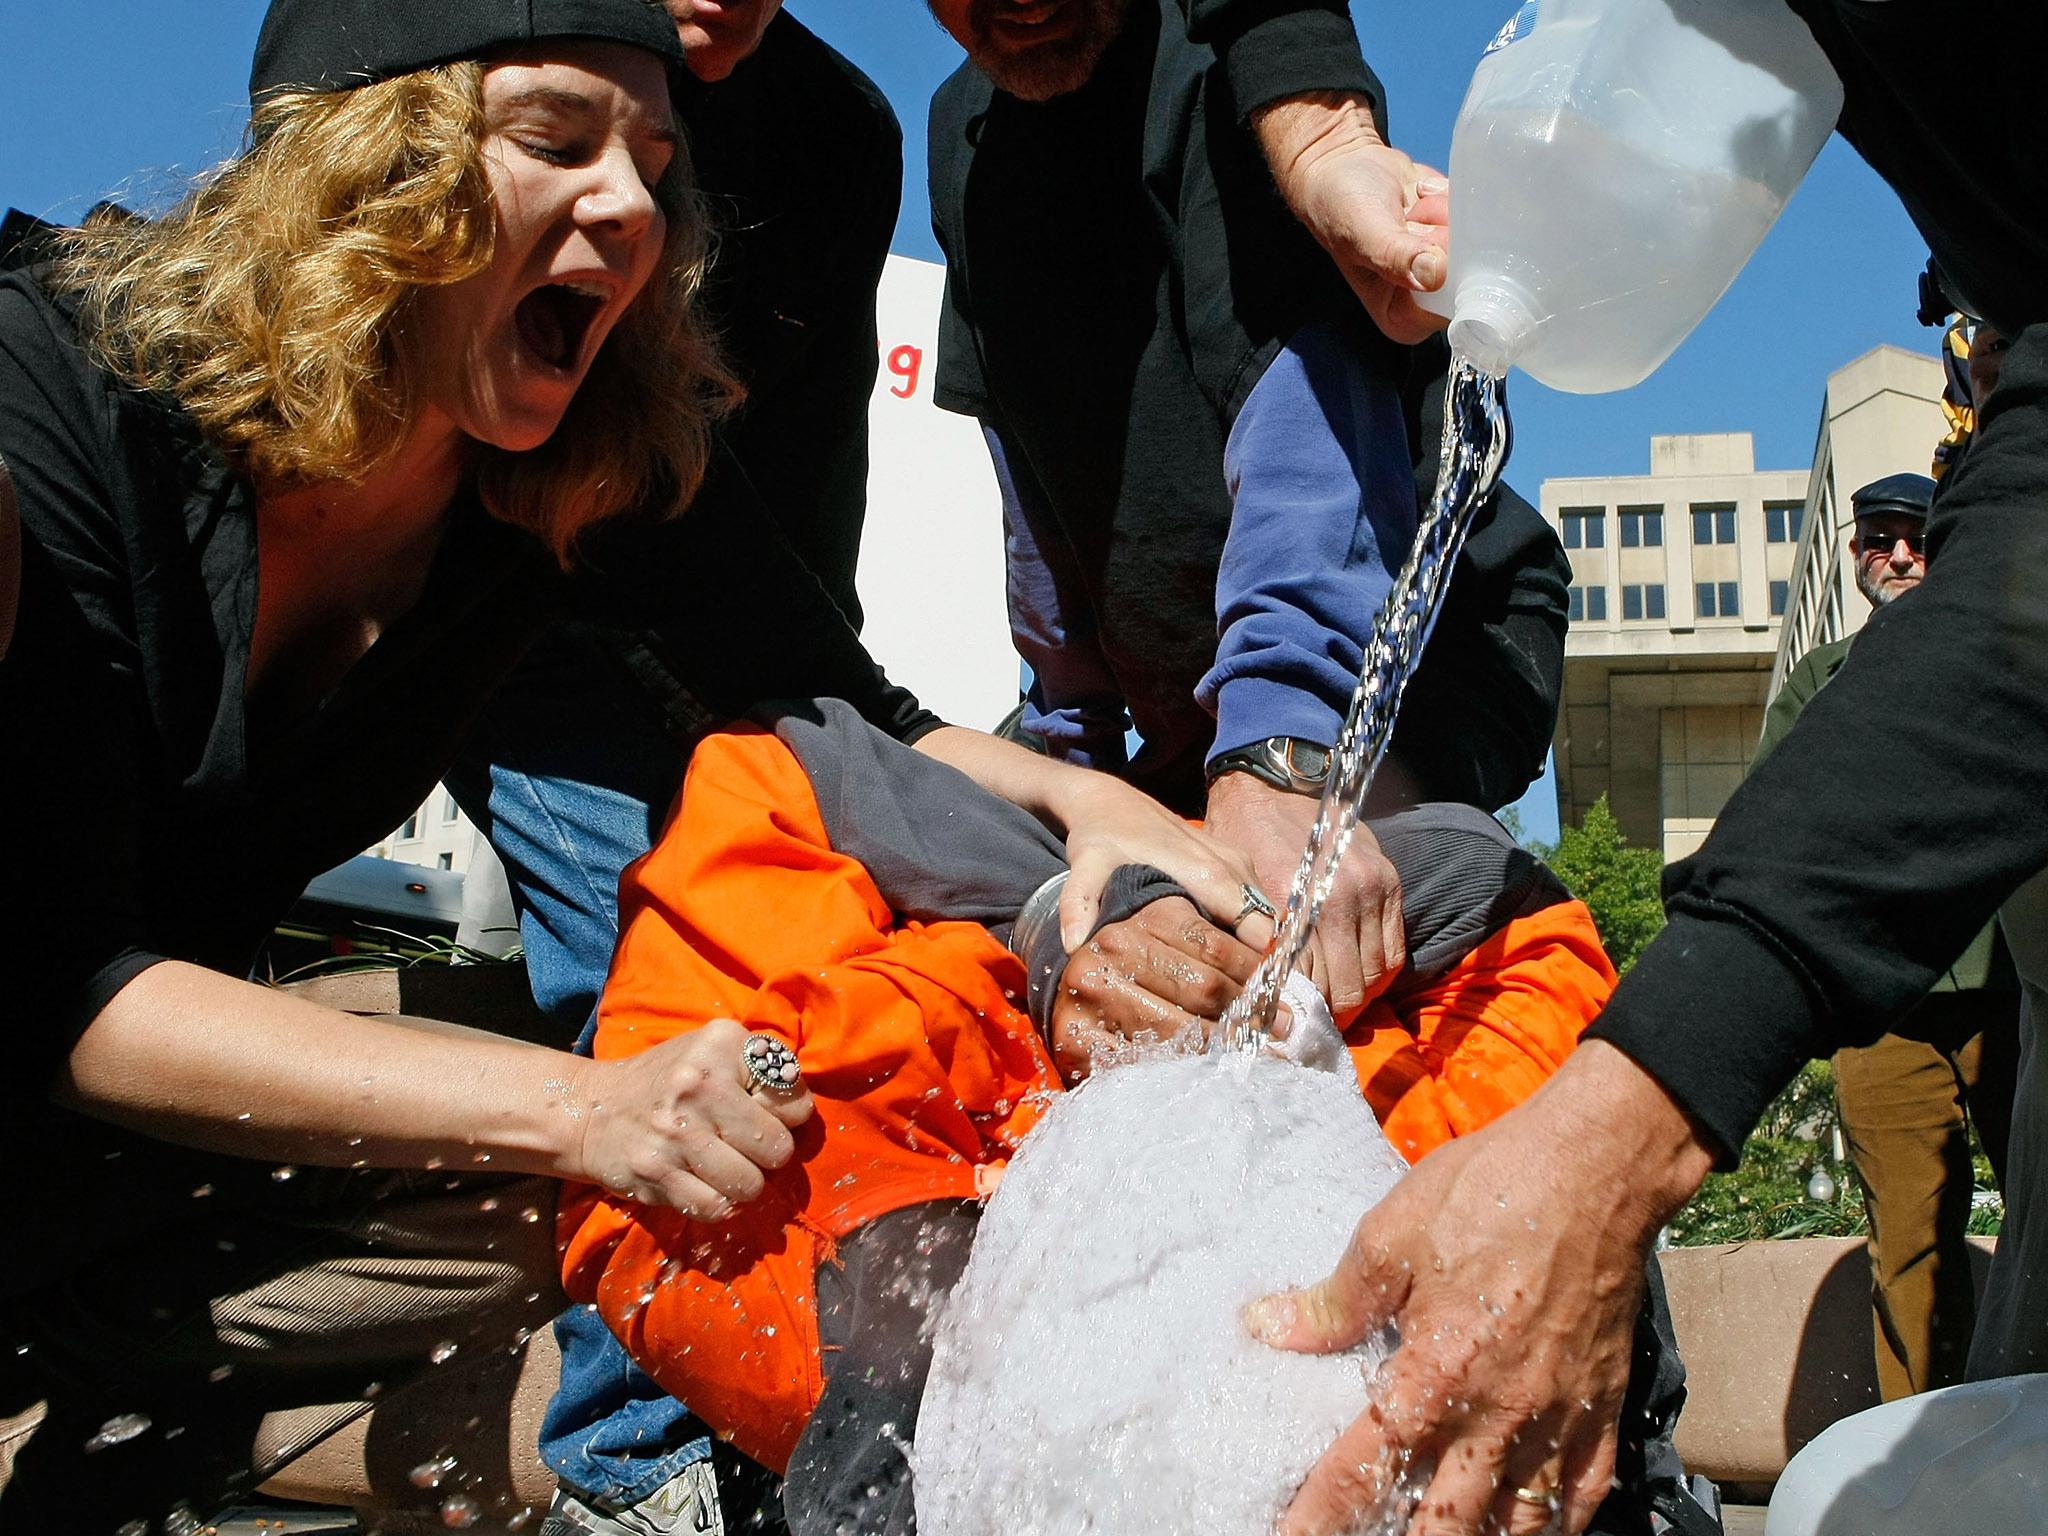 Activists demonstrate waterboarding in front of the Justice Department